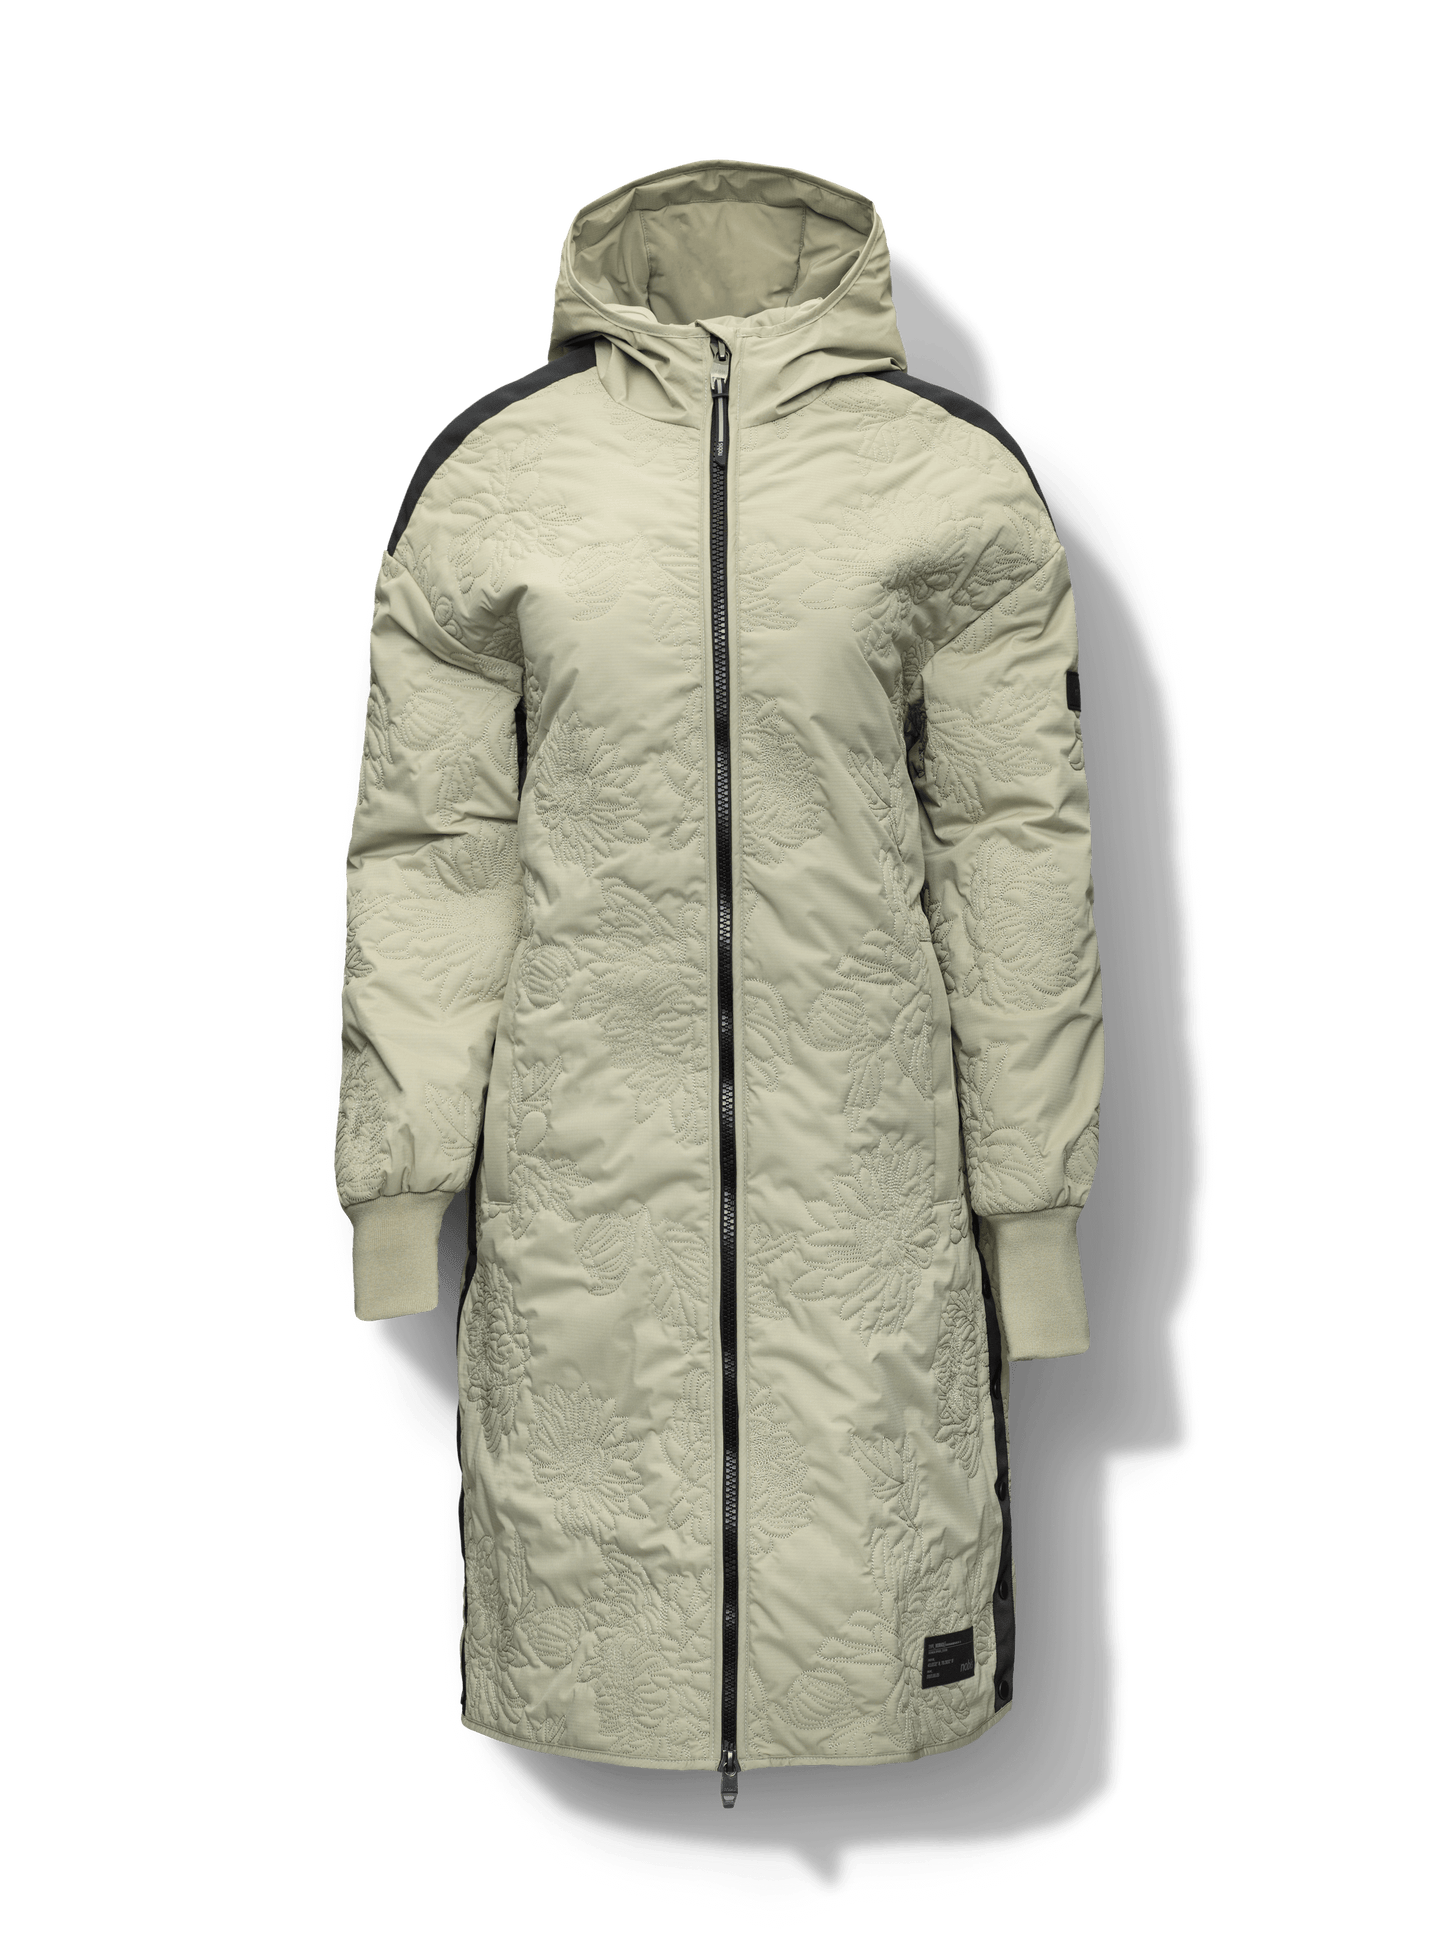 Surrey Women's Performance Quilted Long Mid Layer Jacket in knee length, Primaloft Gold Insulation Active+, non-removable hood, single welt magnetic closure pockets, ribbed cuffs, two-way centre front zipper, grosgrain ribbon detail and shoulders and side seam, and snap closure side seam vents, in Tea